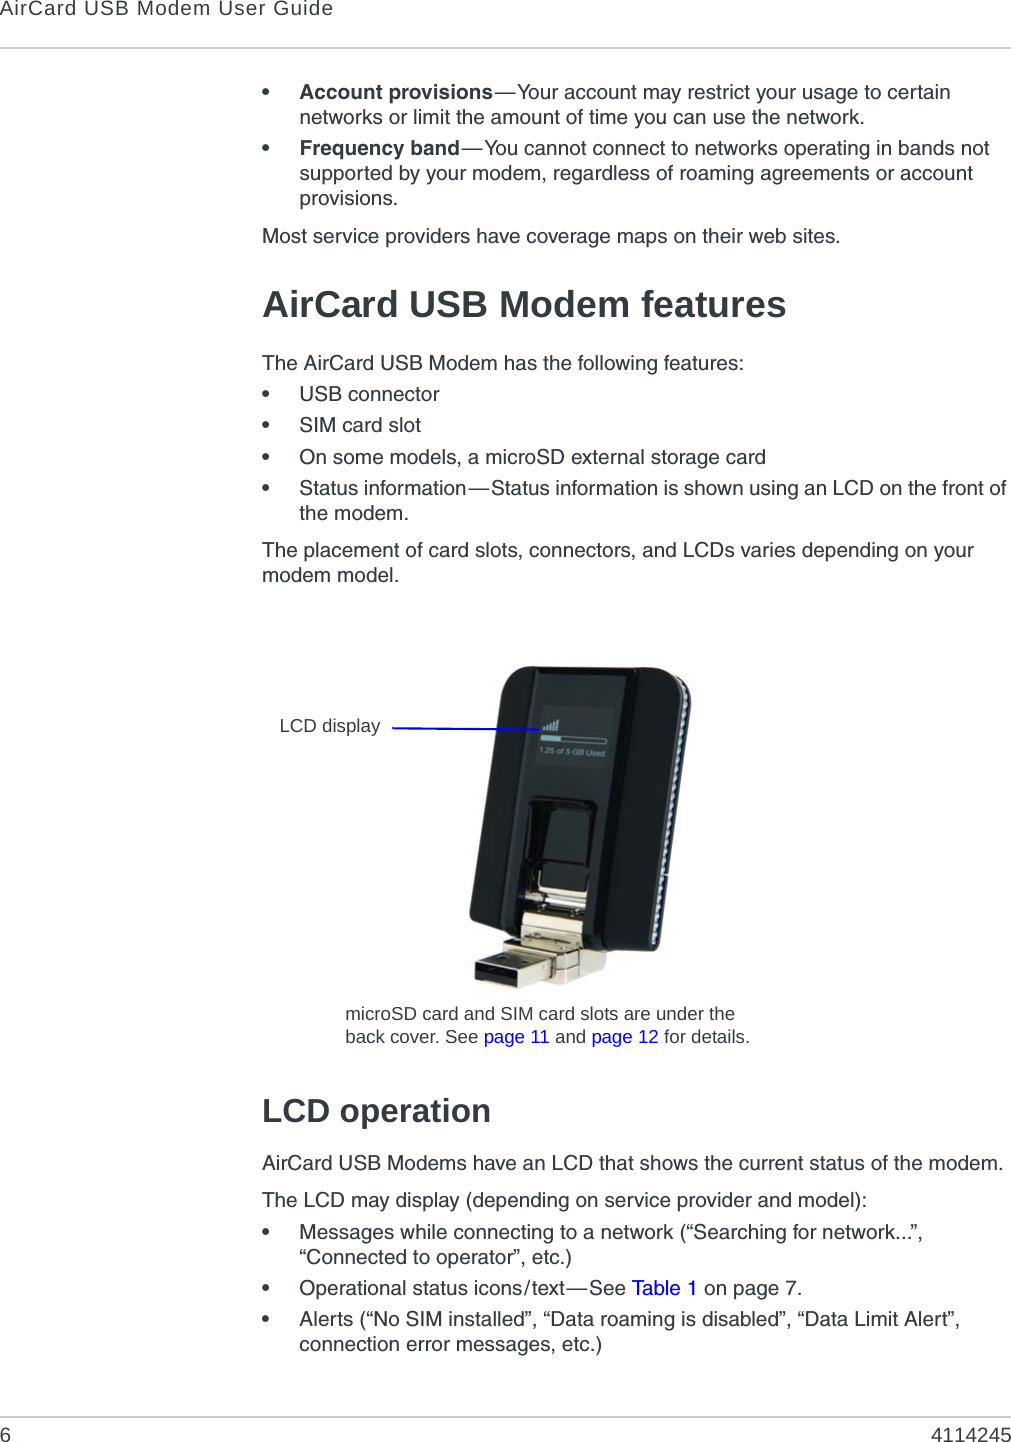 AirCard USB Modem User Guide64114245• Account provisions—Your account may restrict your usage to certain networks or limit the amount of time you can use the network.• Frequency band—You cannot connect to networks operating in bands not supported by your modem, regardless of roaming agreements or account provisions.Most service providers have coverage maps on their web sites.AirCard USB Modem featuresThe AirCard USB Modem has the following features:•USB connector•SIM card slot•On some models, a microSD external storage card•Status information—Status information is shown using an LCD on the front of the modem.The placement of card slots, connectors, and LCDs varies depending on your modem model.LCD operationAirCard USB Modems have an LCD that shows the current status of the modem.The LCD may display (depending on service provider and model):•Messages while connecting to a network (“Searching for network...”, “Connected to operator”, etc.)•Operational status icons/text—See Ta b l e 1  on page 7.•Alerts (“No SIM installed”, “Data roaming is disabled”, “Data Limit Alert”, connection error messages, etc.)LCD displaymicroSD card and SIM card slots are under the back cover. See page 11 and page 12 for details.